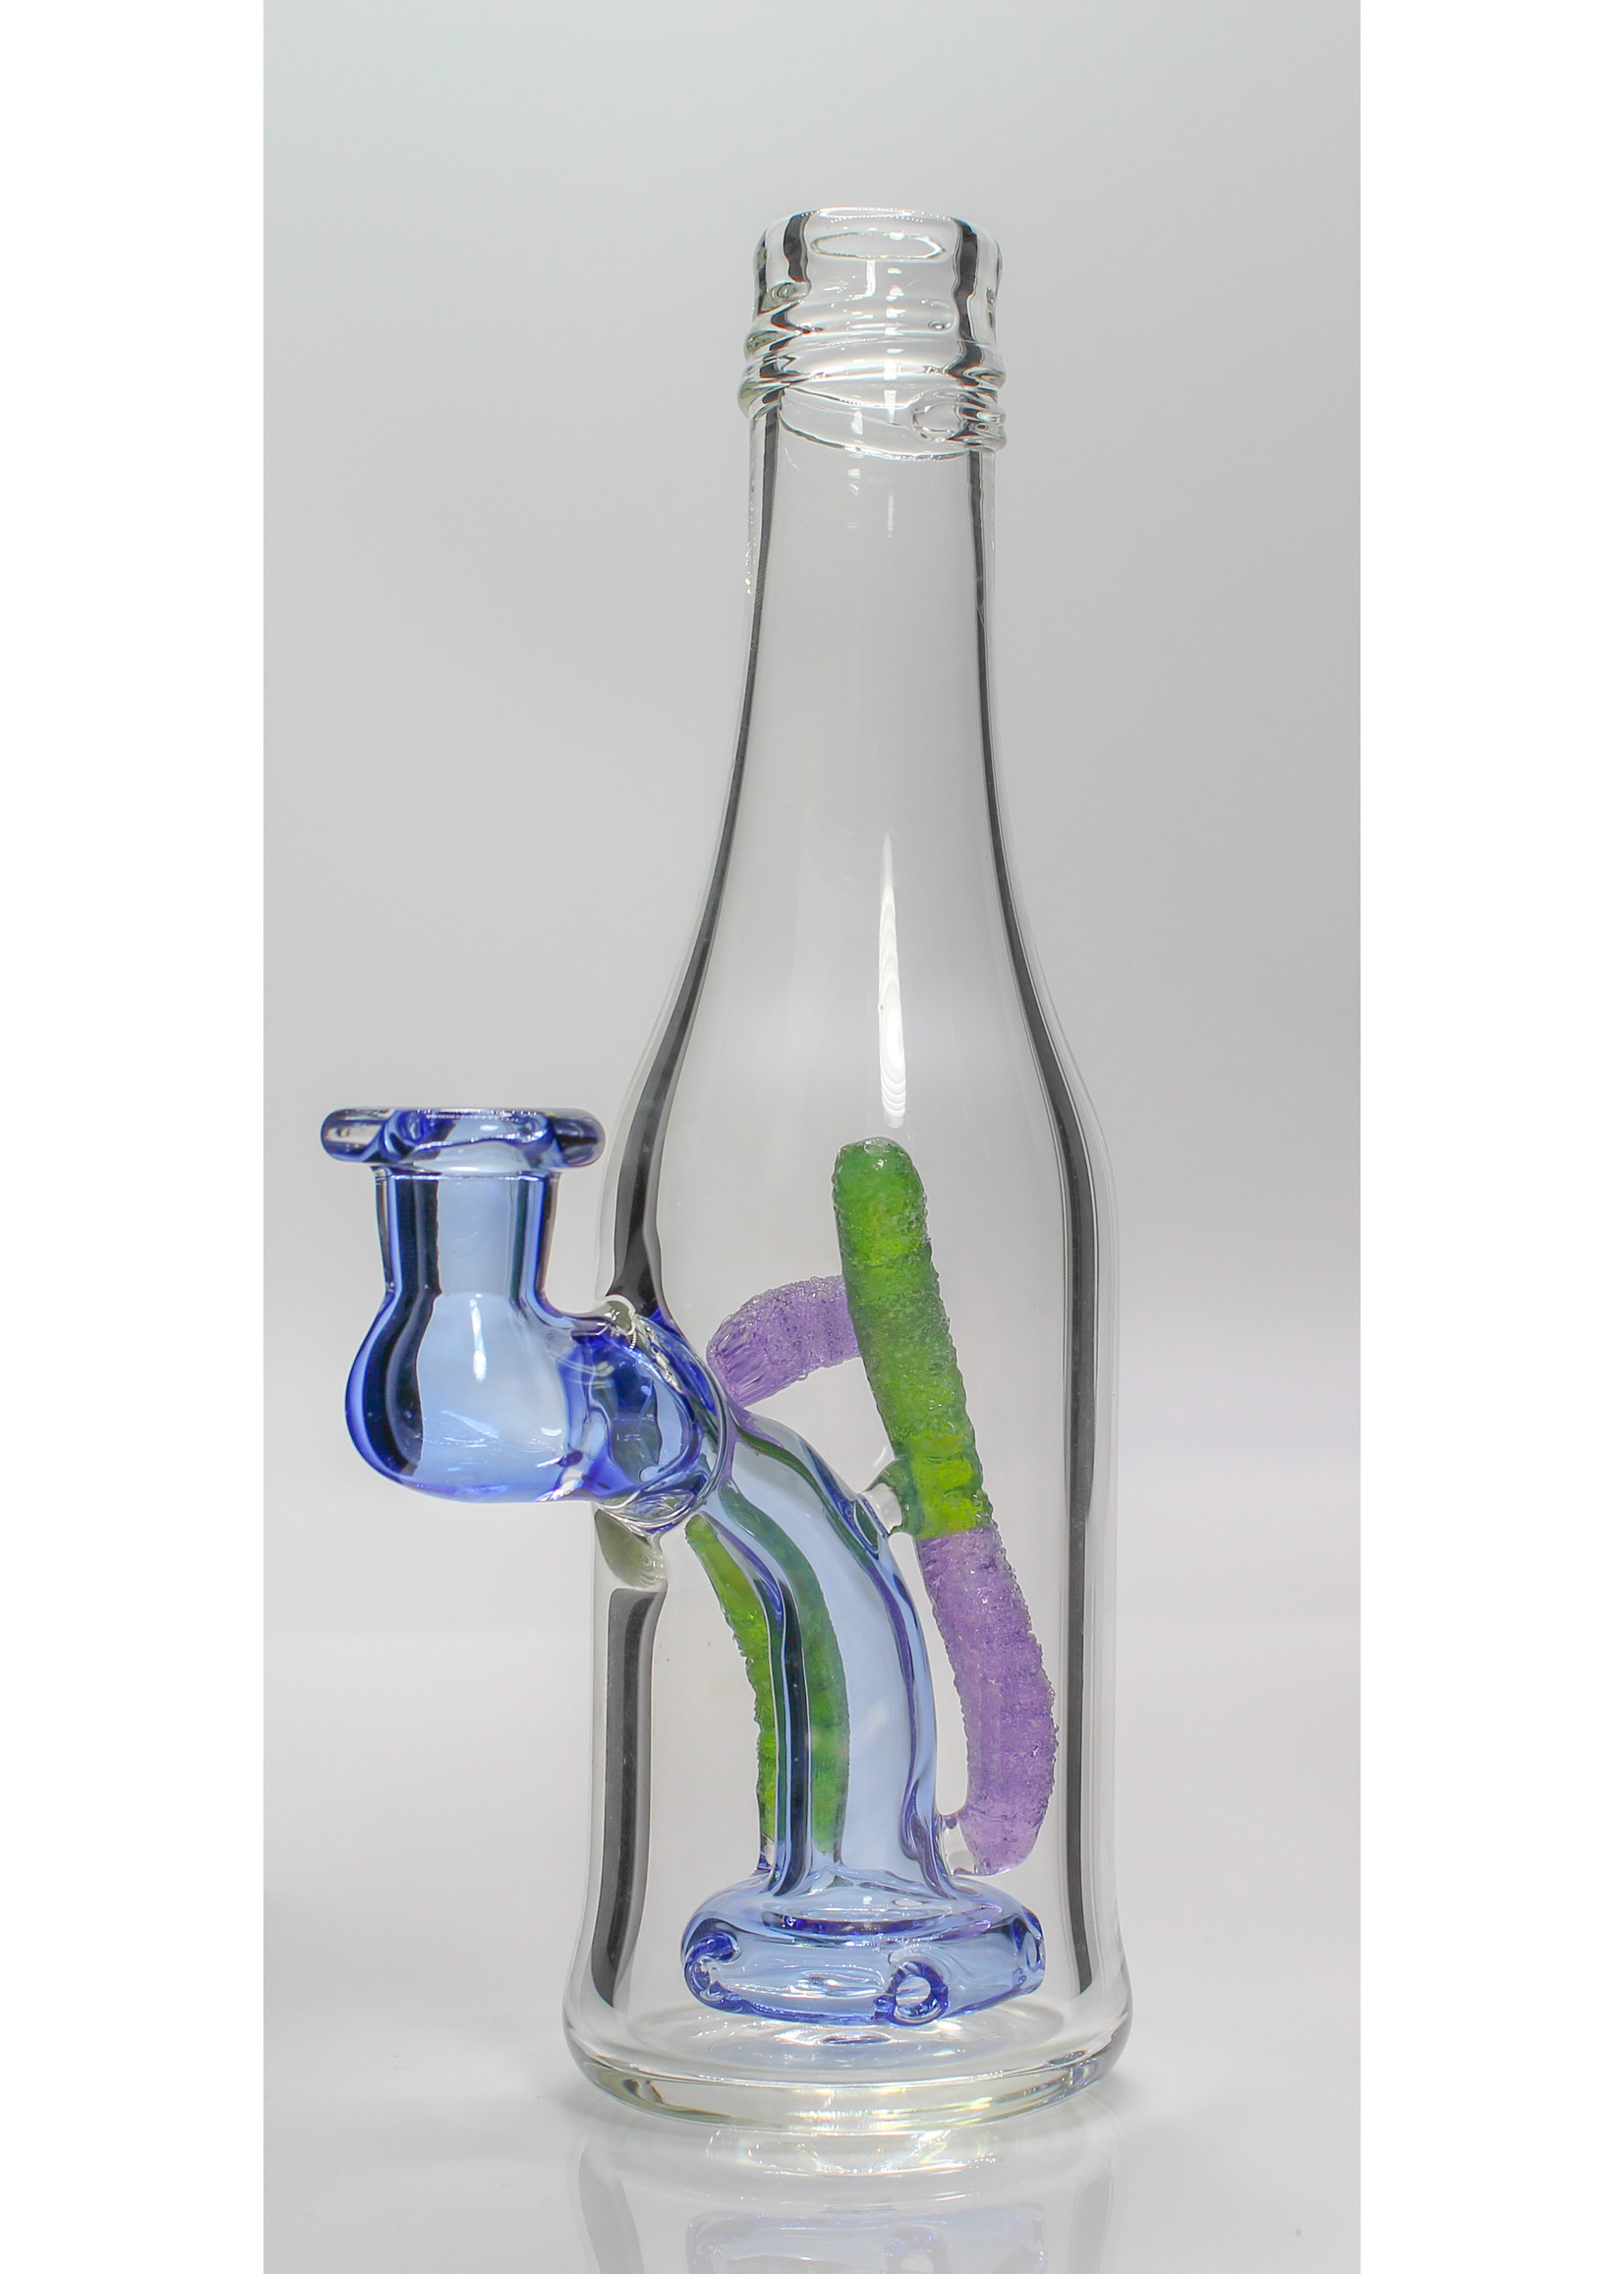 Emperial Glass Emperial Glass Bottle Rig #4